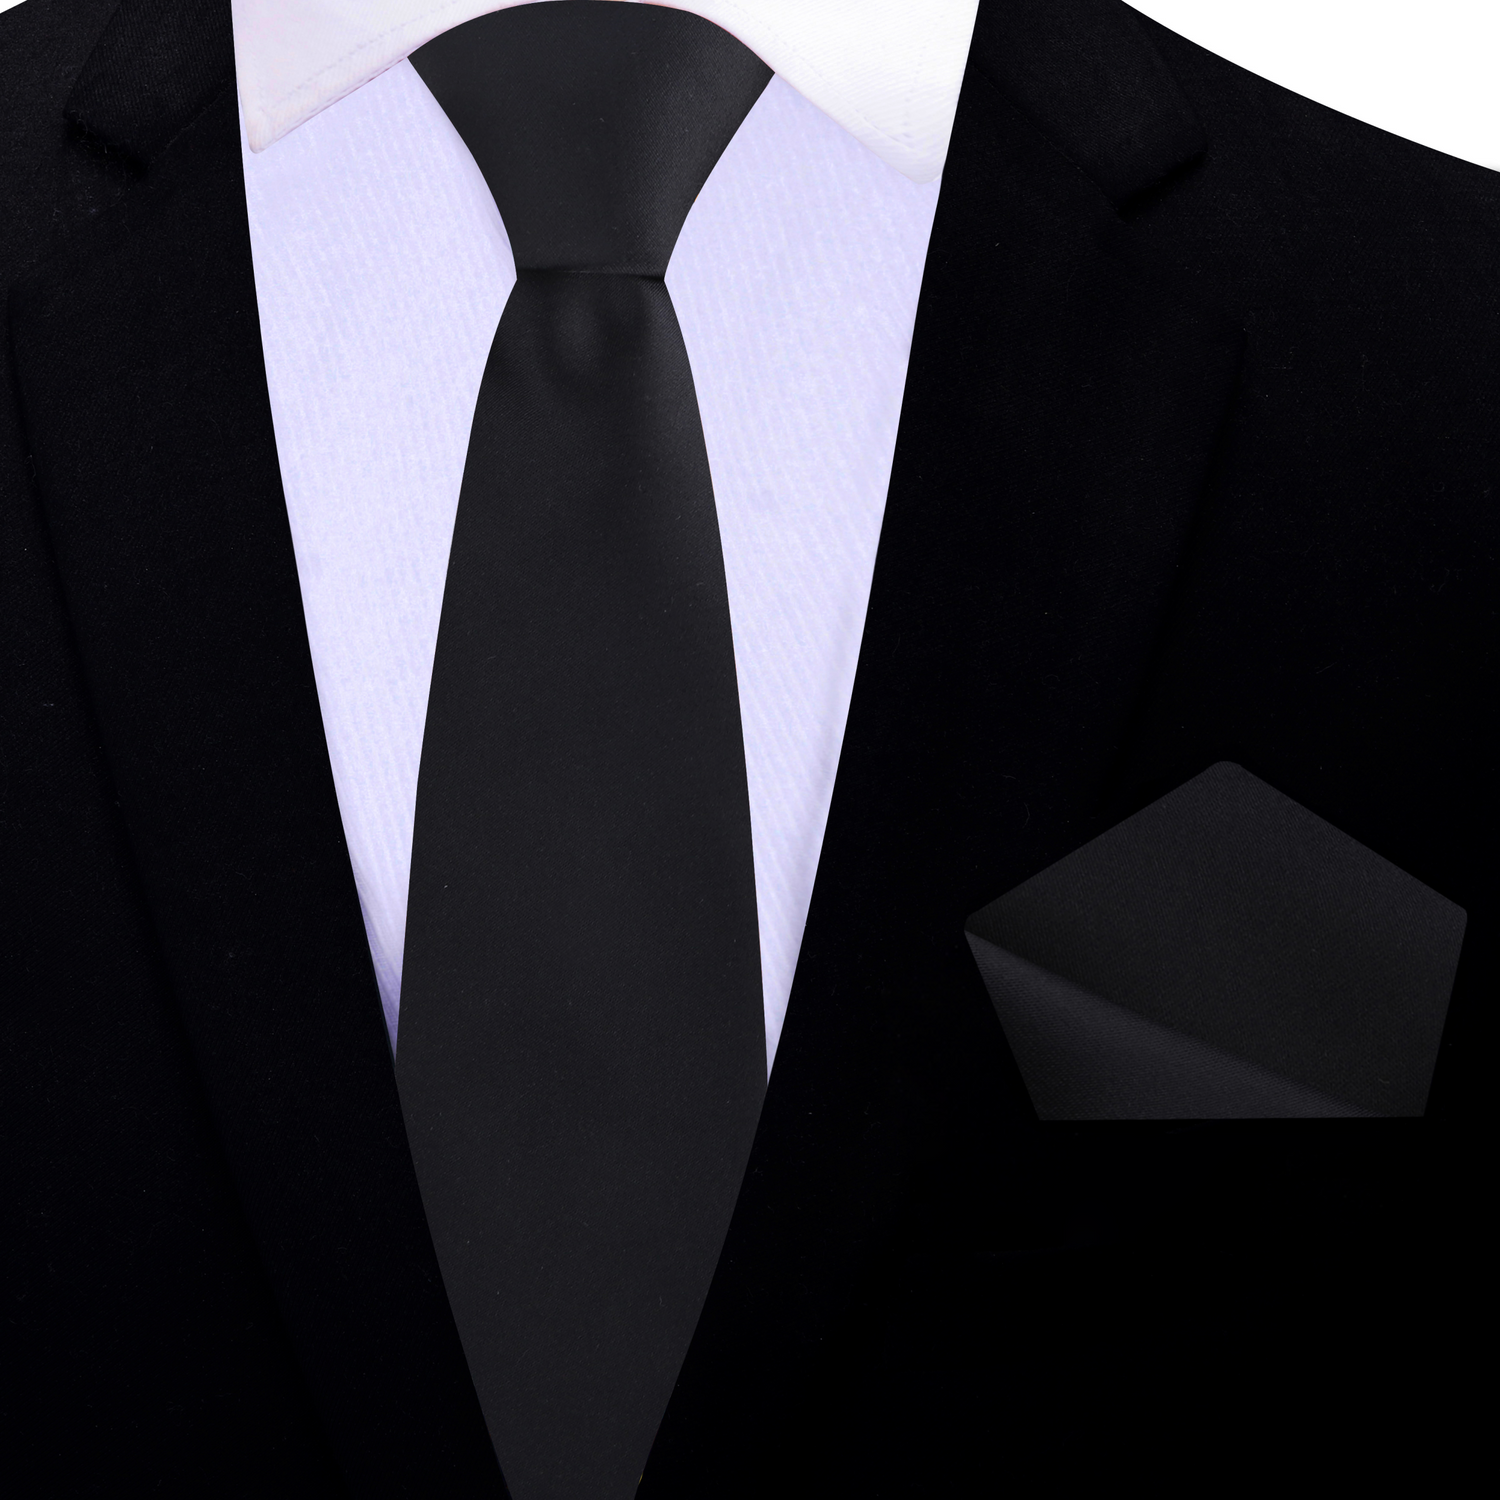 Thin Tie: Black Necktie with Solid Black Pocket Square on Black Suit